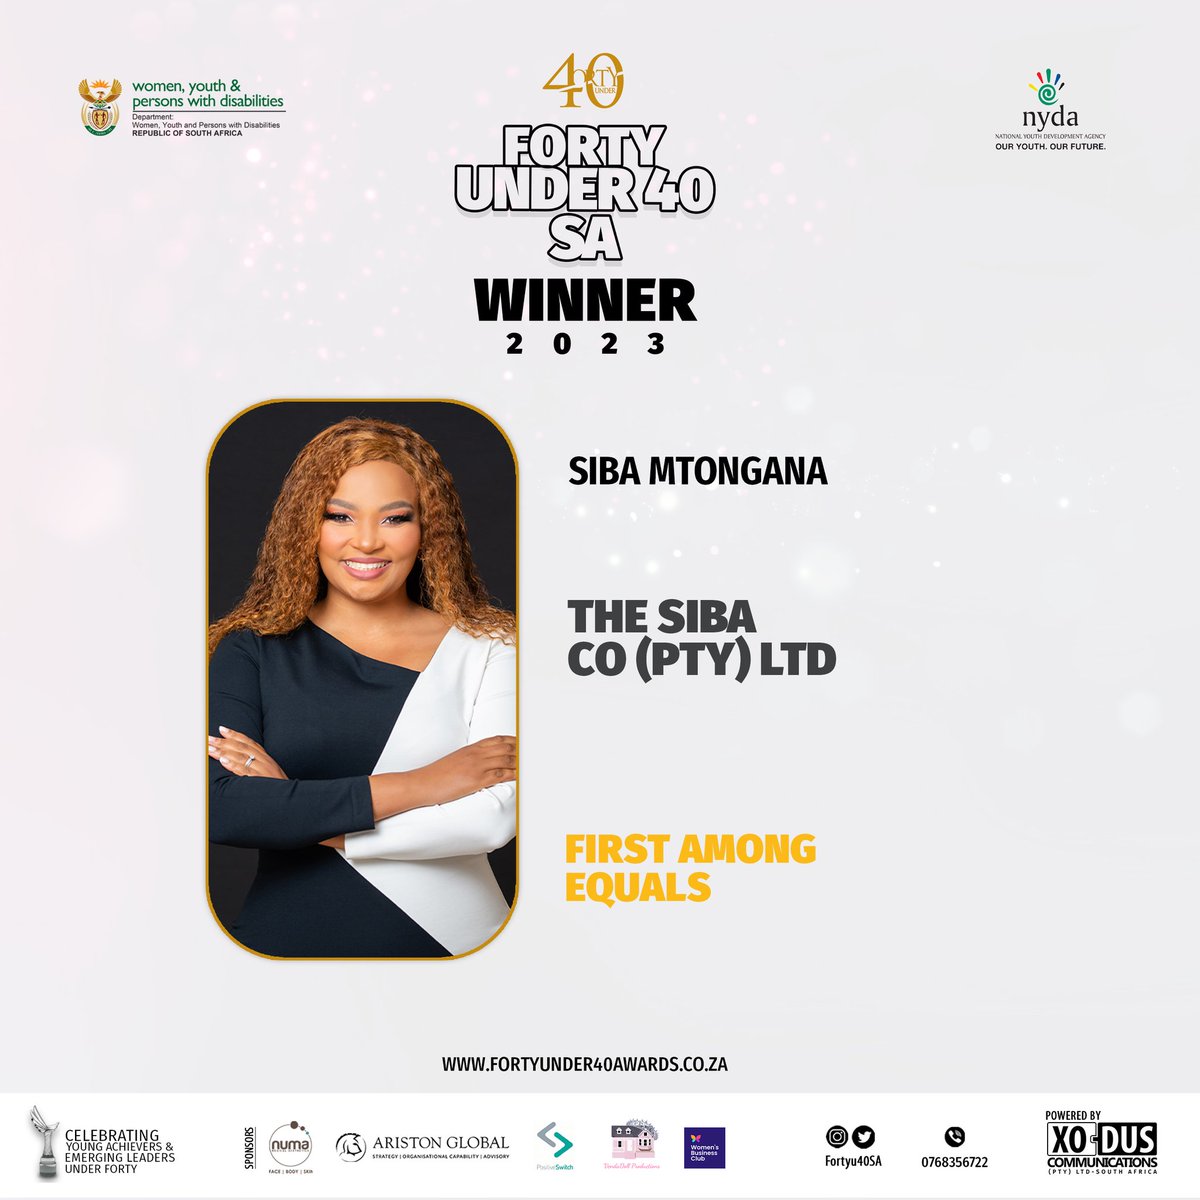 Congratulations First Among Equals Award winner of the Forty Under 40 Awards South Africa 2023 @SibaMtongana The event took place on 9th September 2023 at the Houghton Hotel For more info, visit fortyunder40awards.co.za #FortyUnder40SouthAfrica #spottedunder40